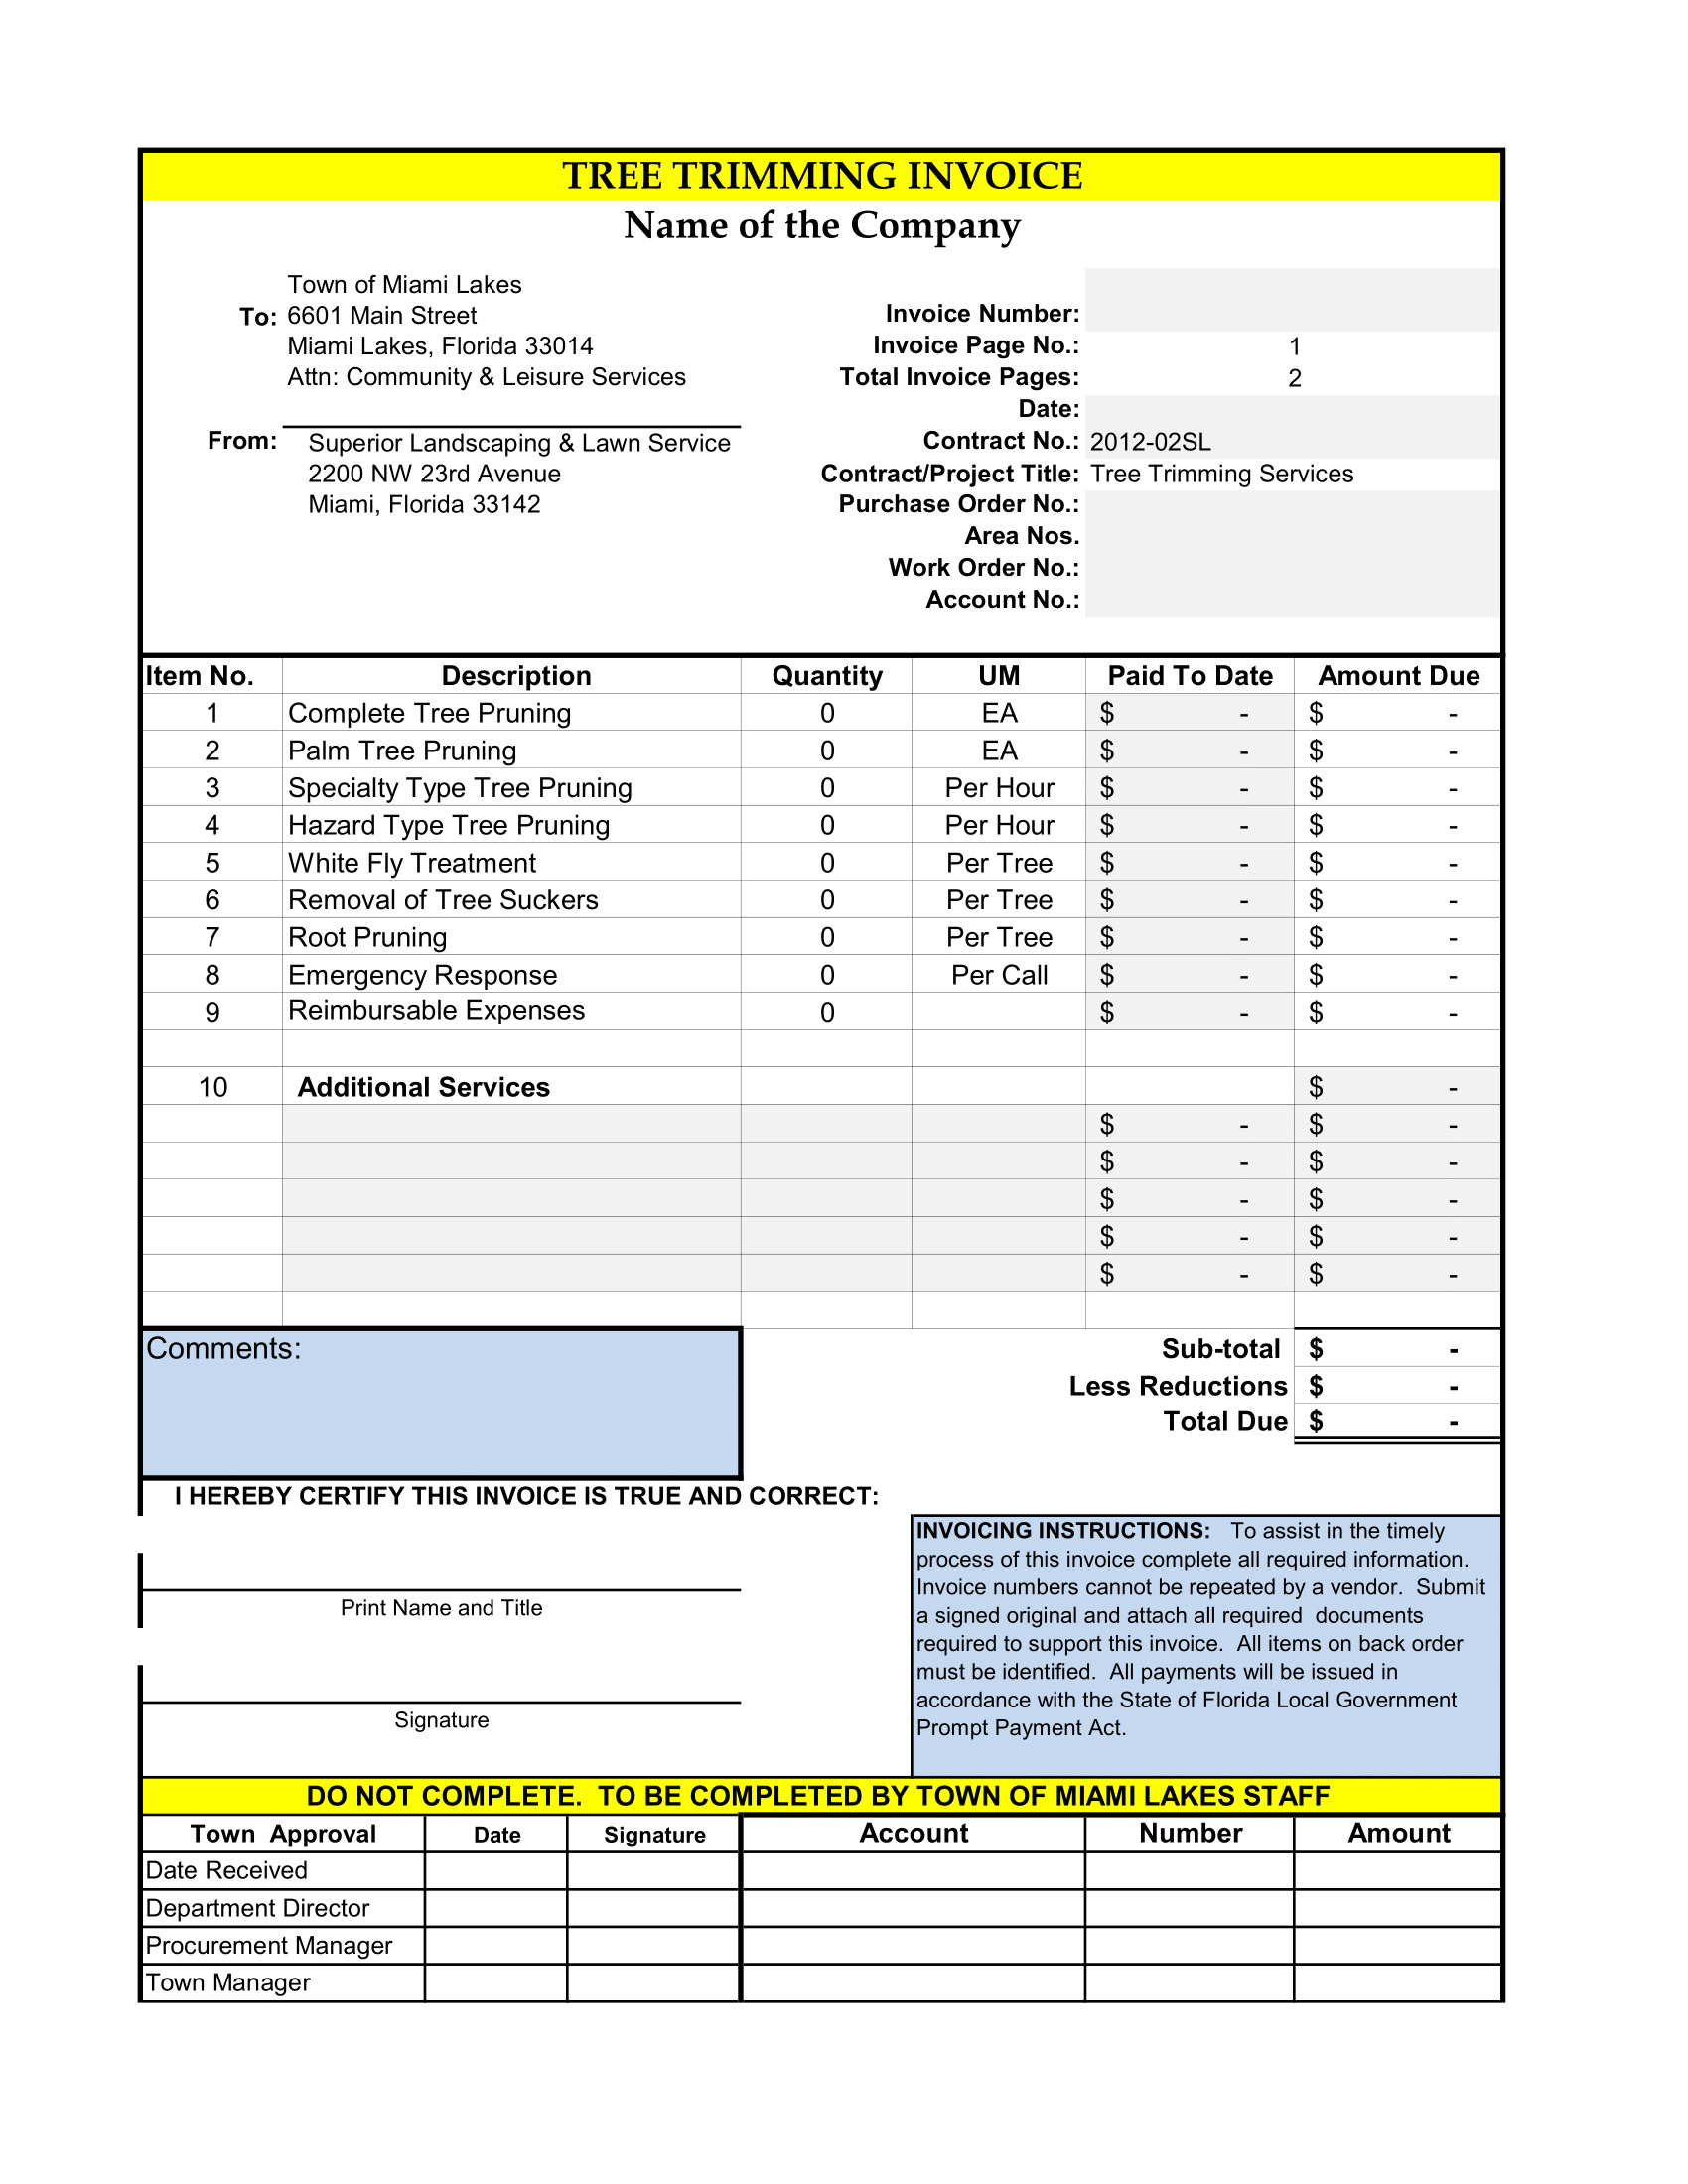 Tree Trimming Invoice Format. Invoice your customer with this invoice template in Excel.